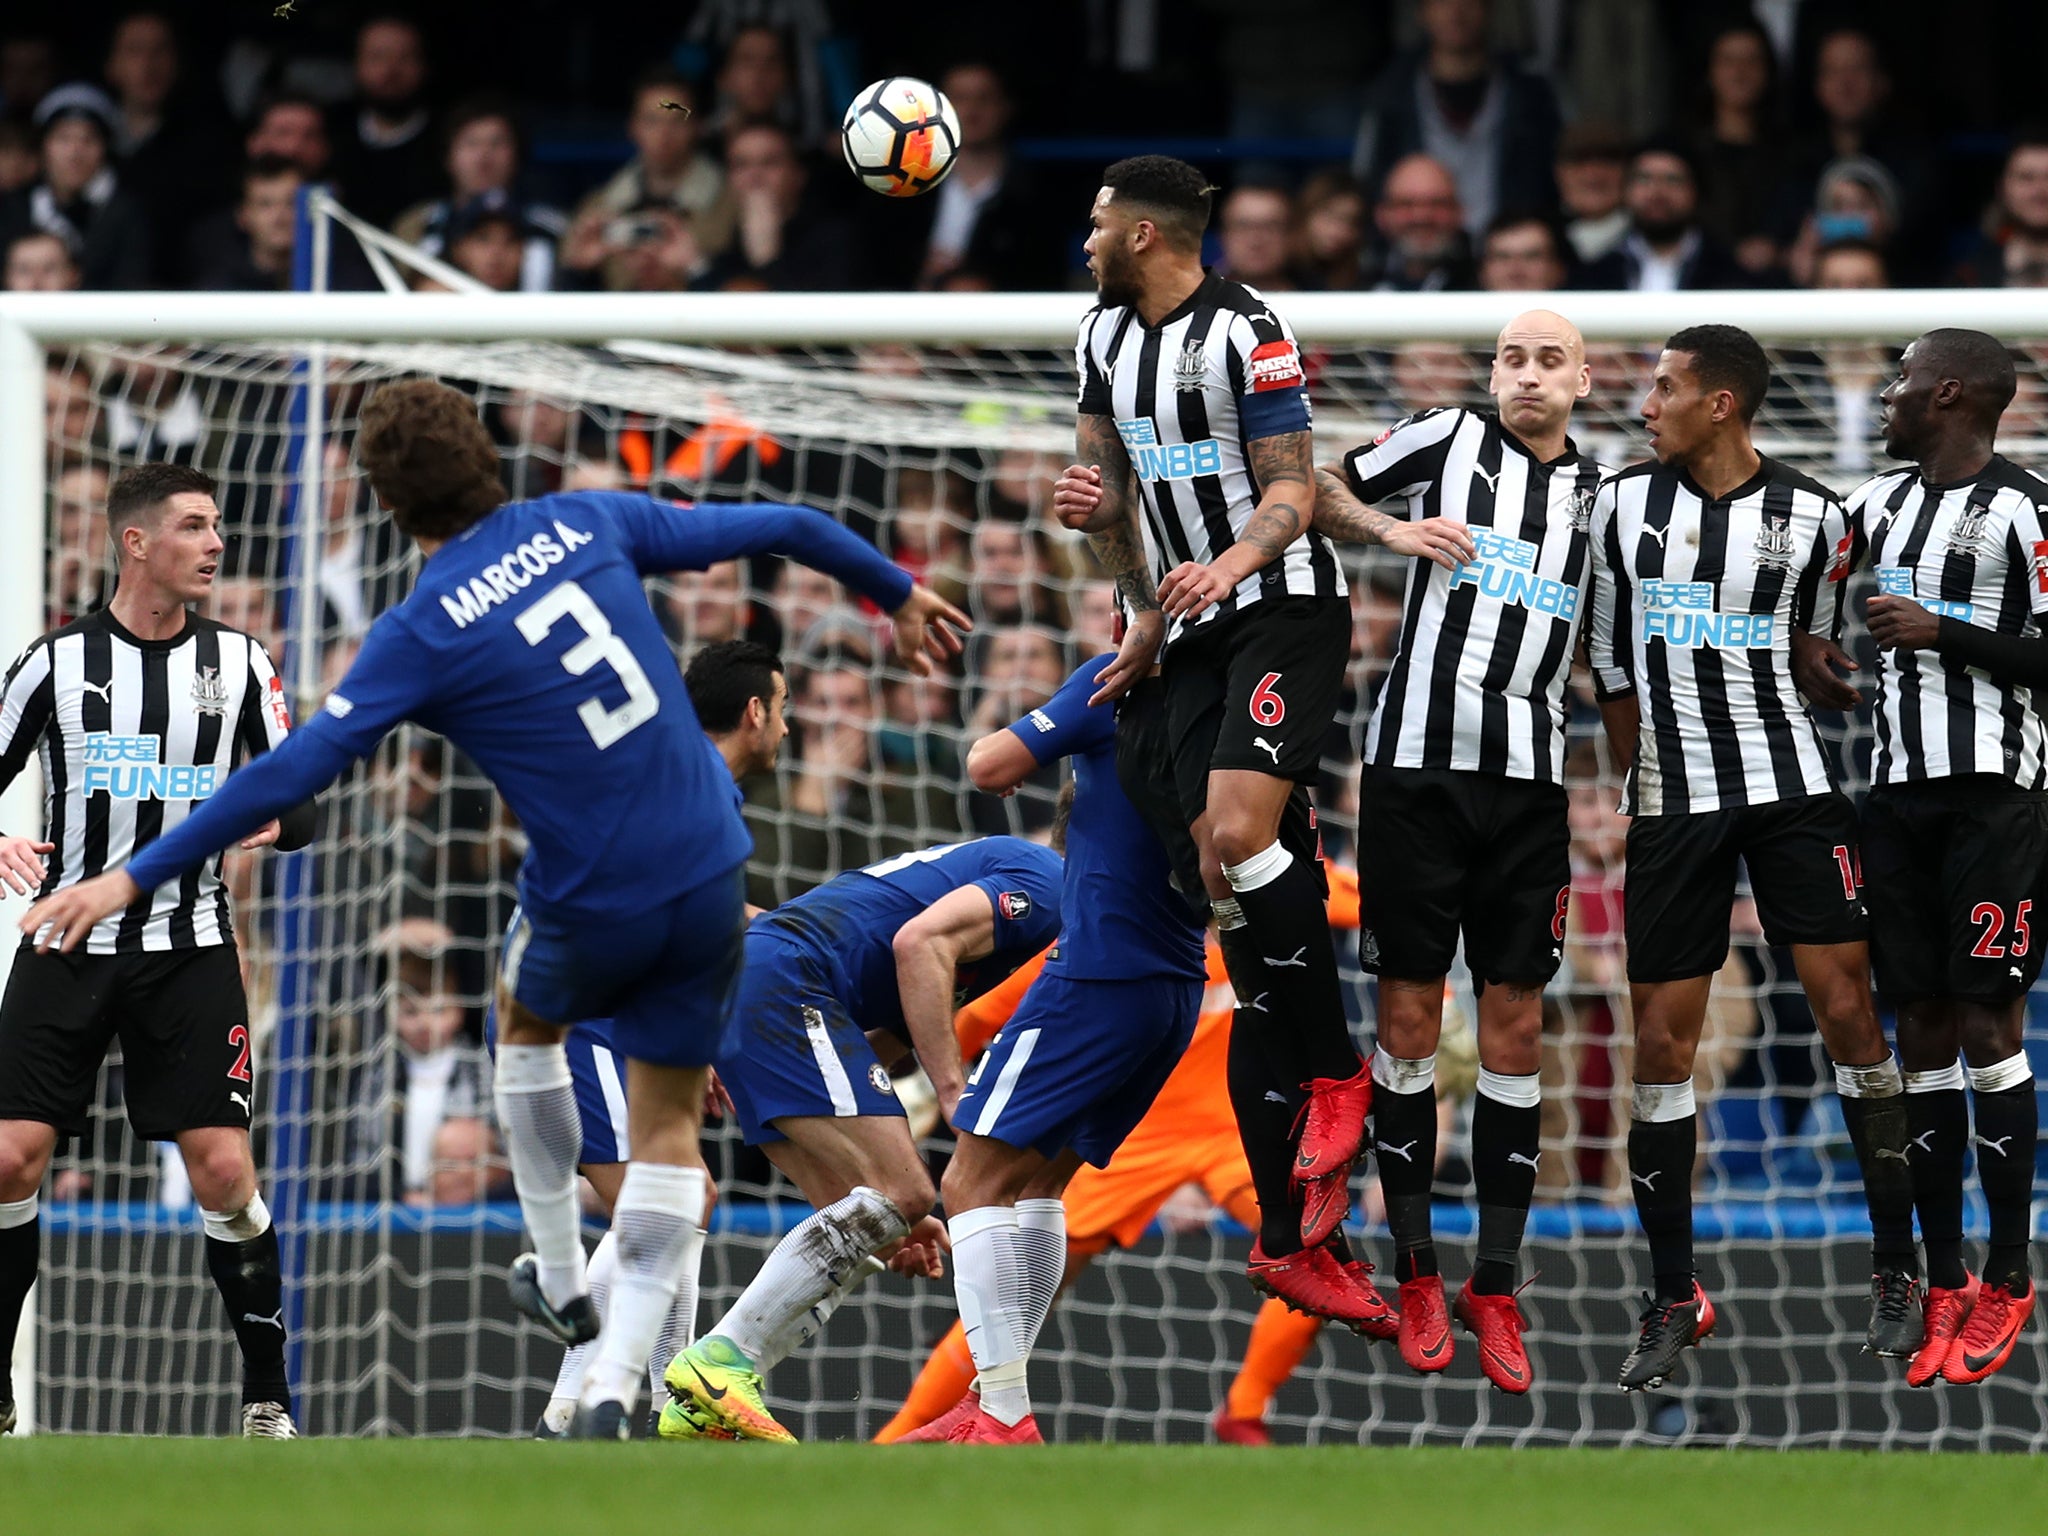 Marcos Alonso curls a free-kick into the Newcastle goal to make it 3-0